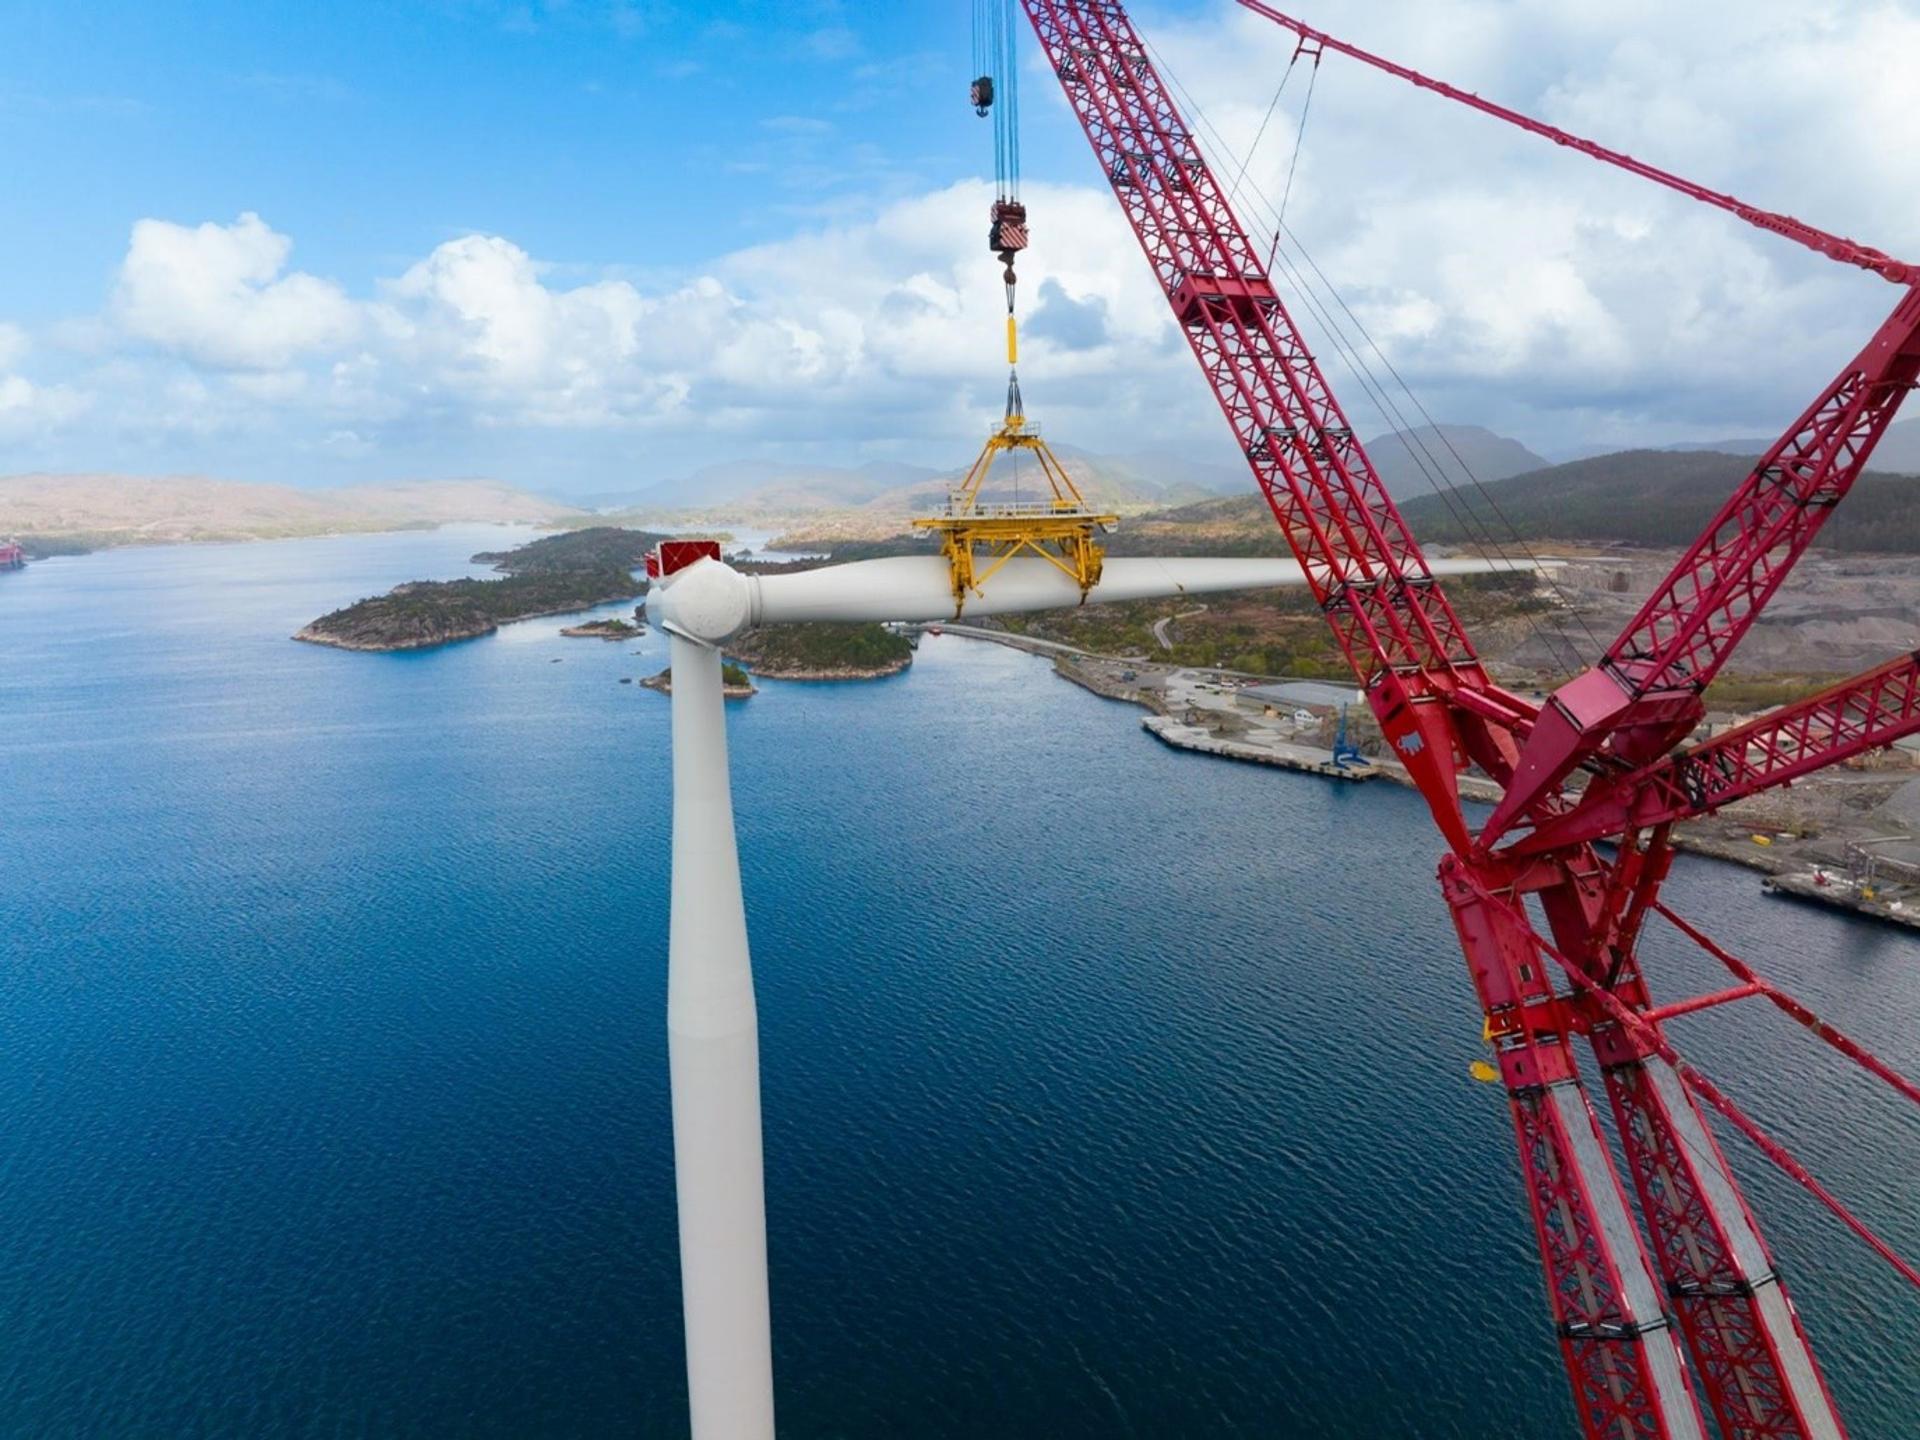 Offshore wind turbine being installed by a red crane